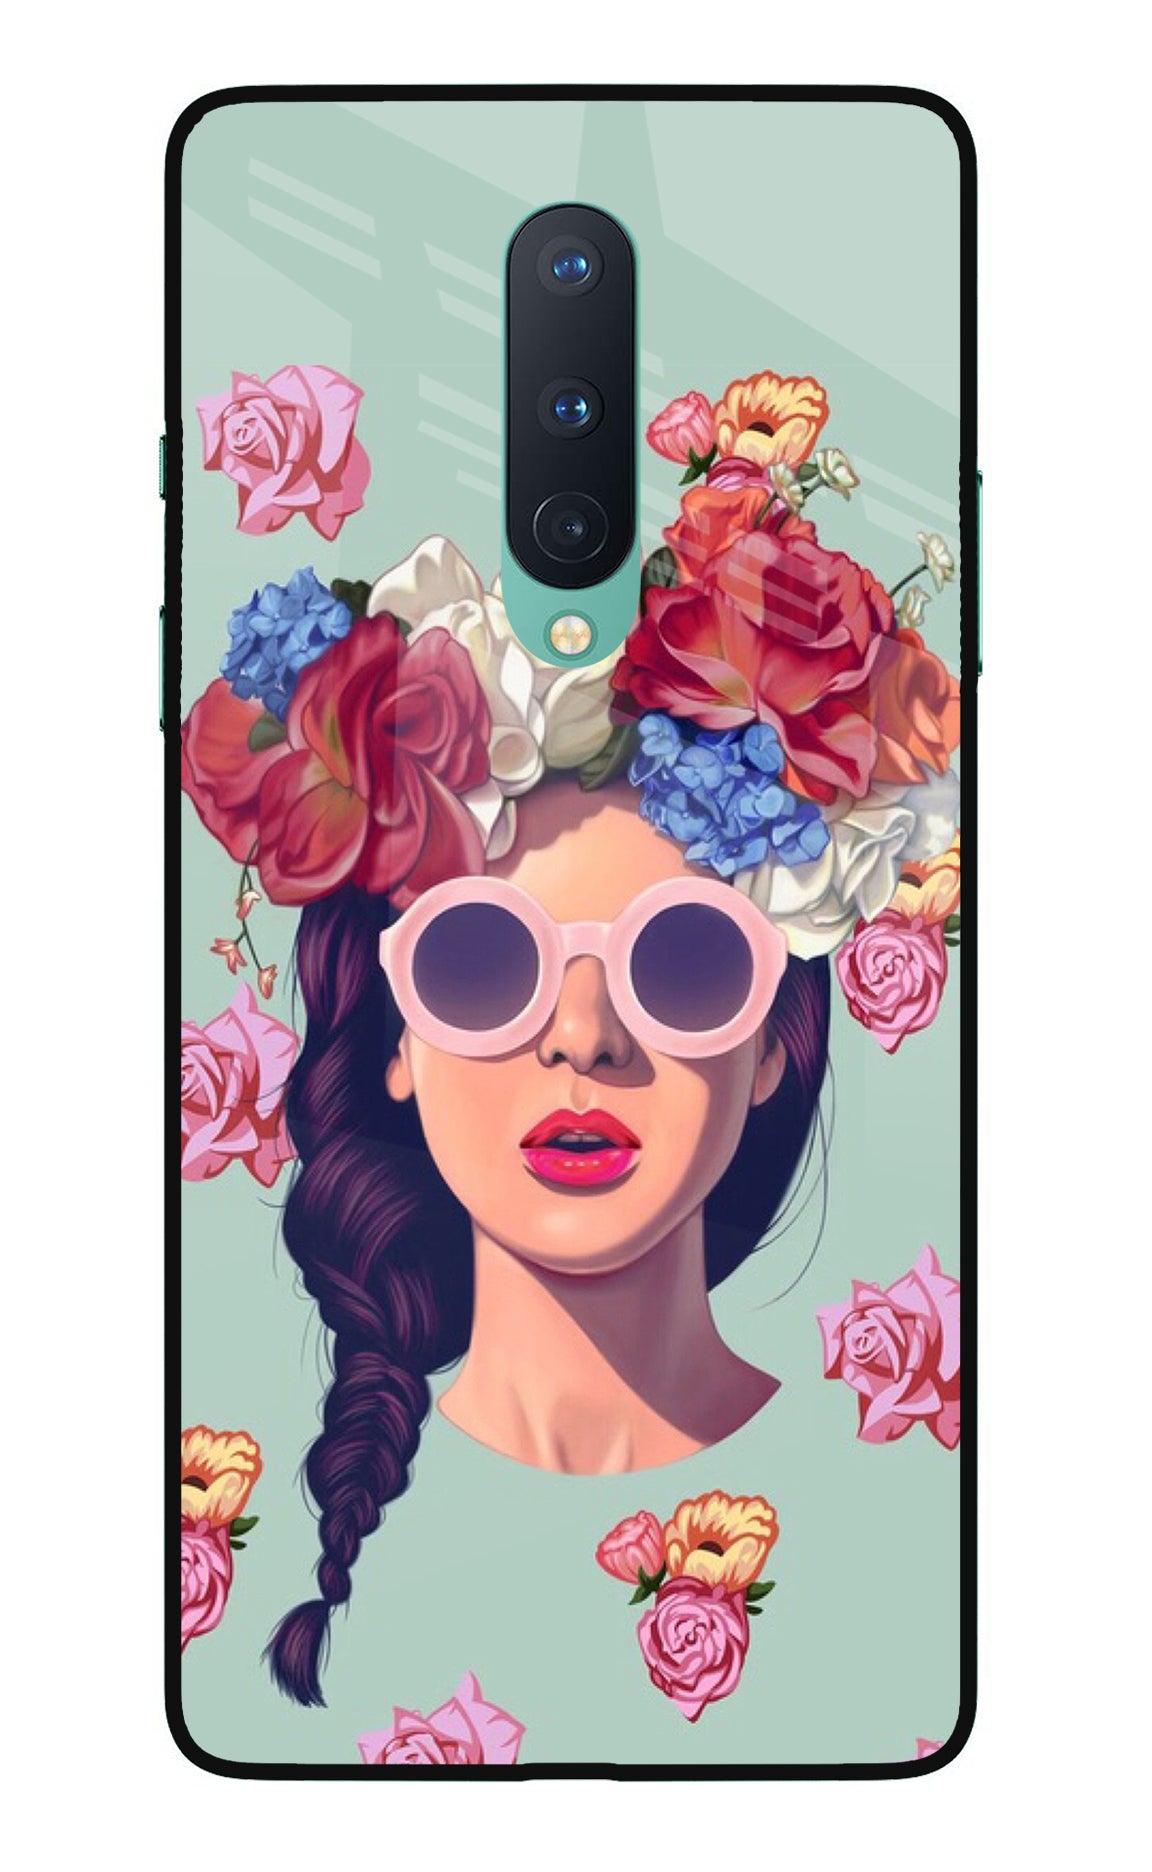 Pretty Girl Oneplus 8 Back Cover